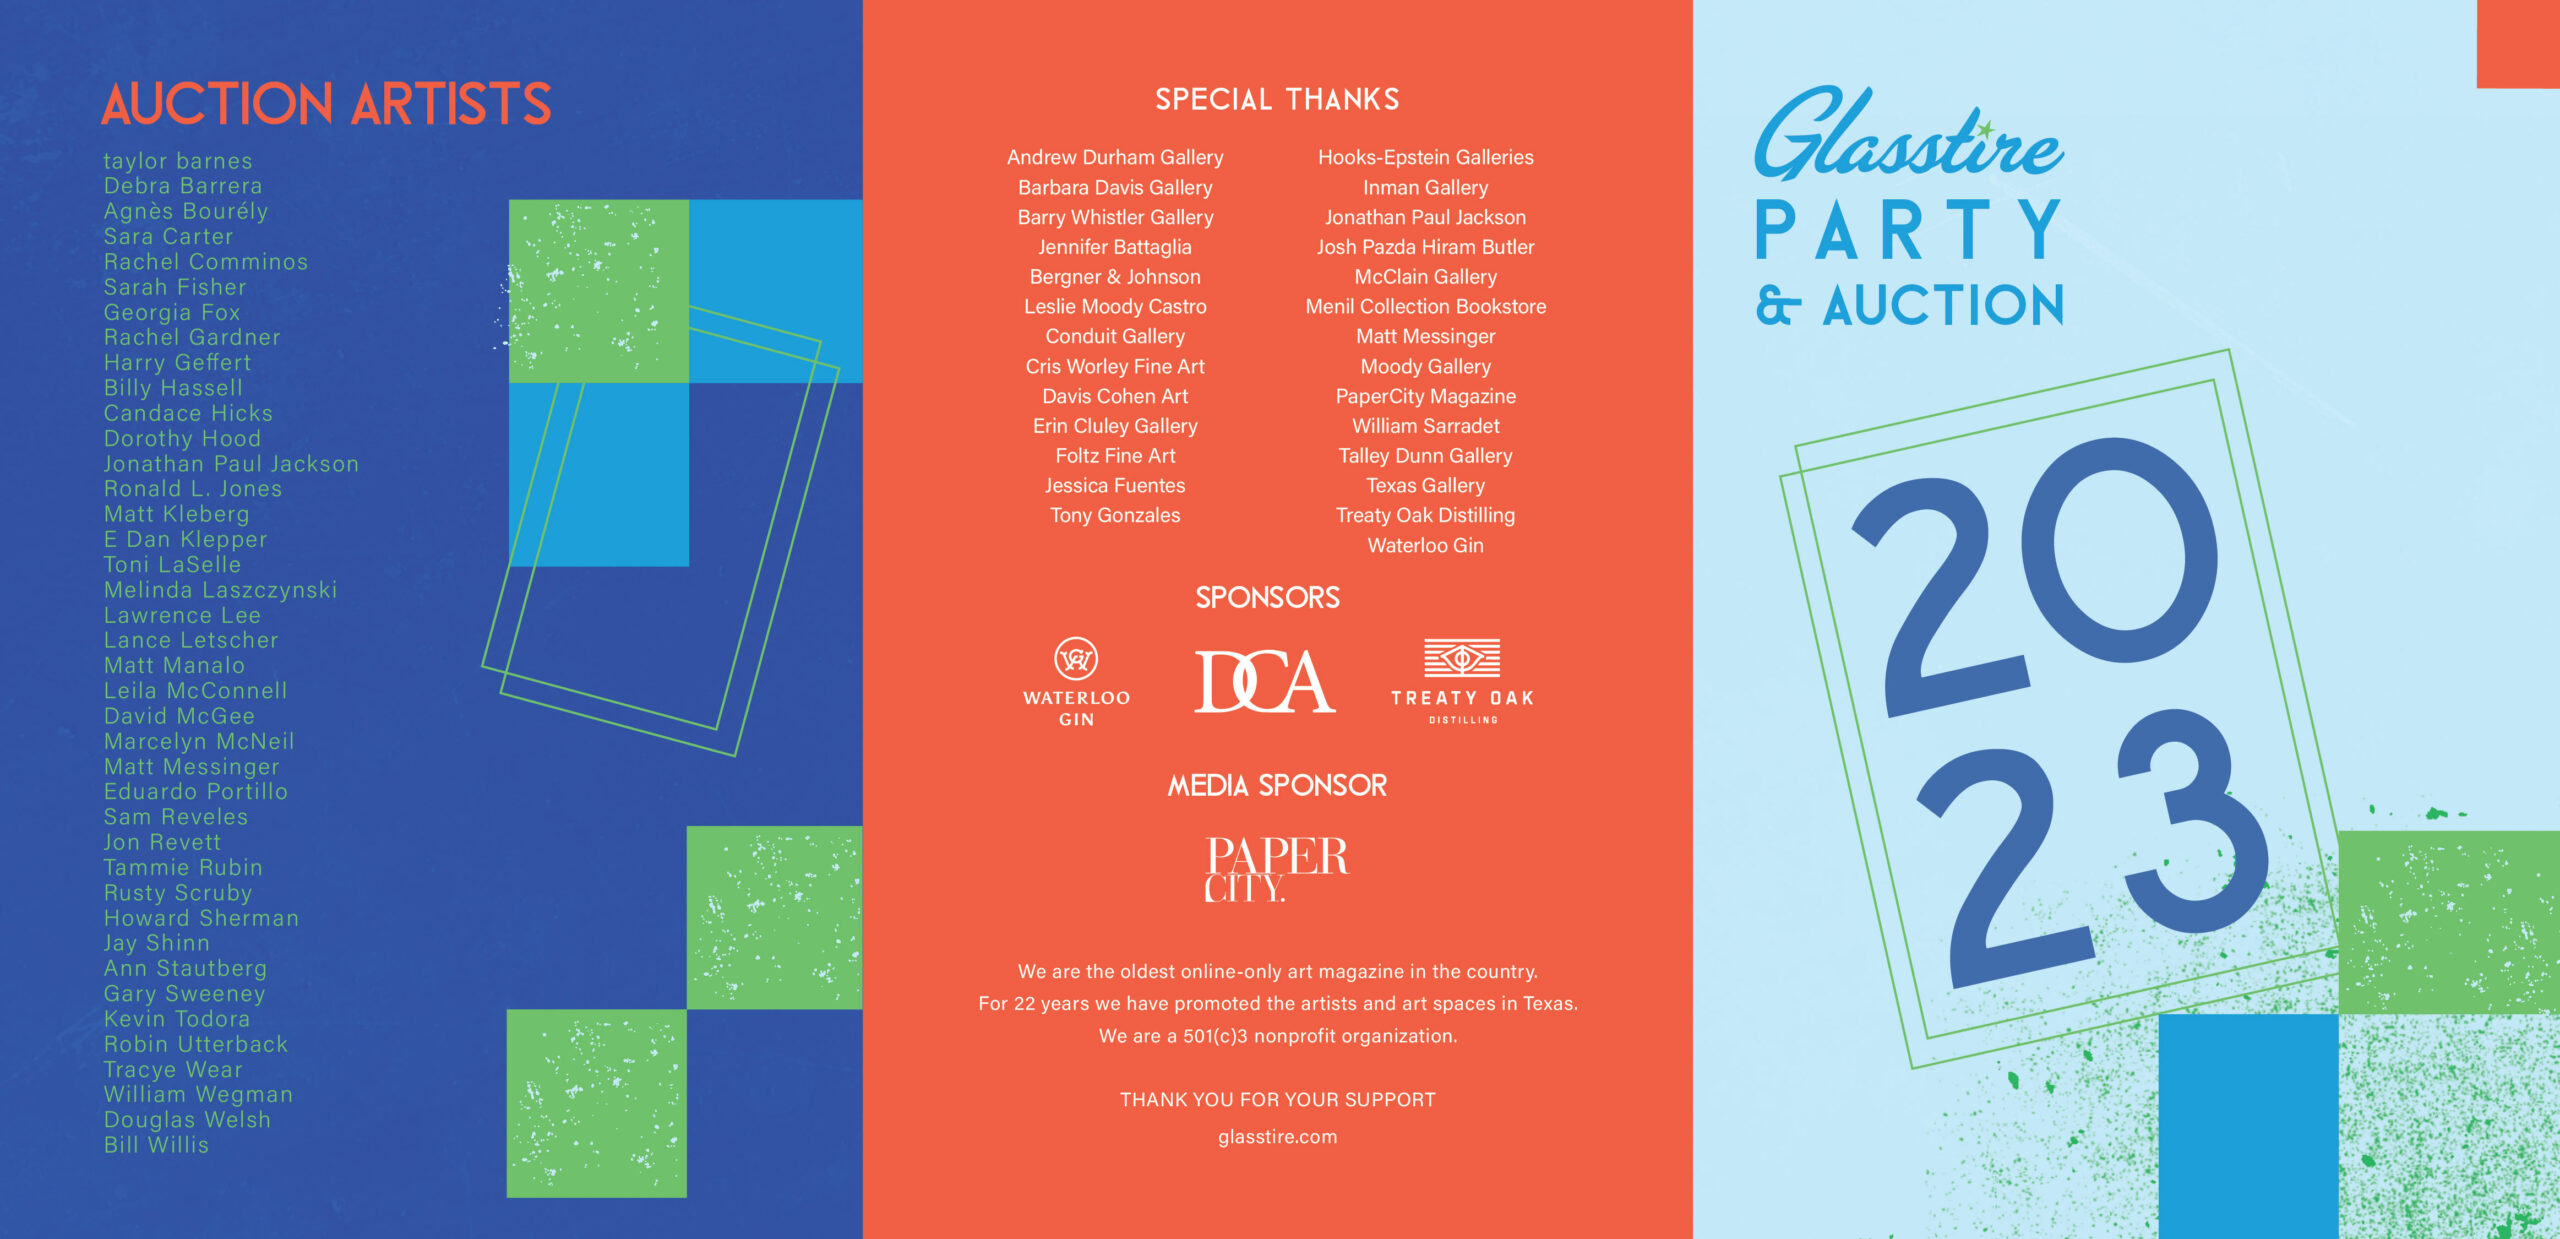 A brightly colored, three-panel invitation listing the details, donors, and auction artists for Glasstire's 2023 fundraising party.